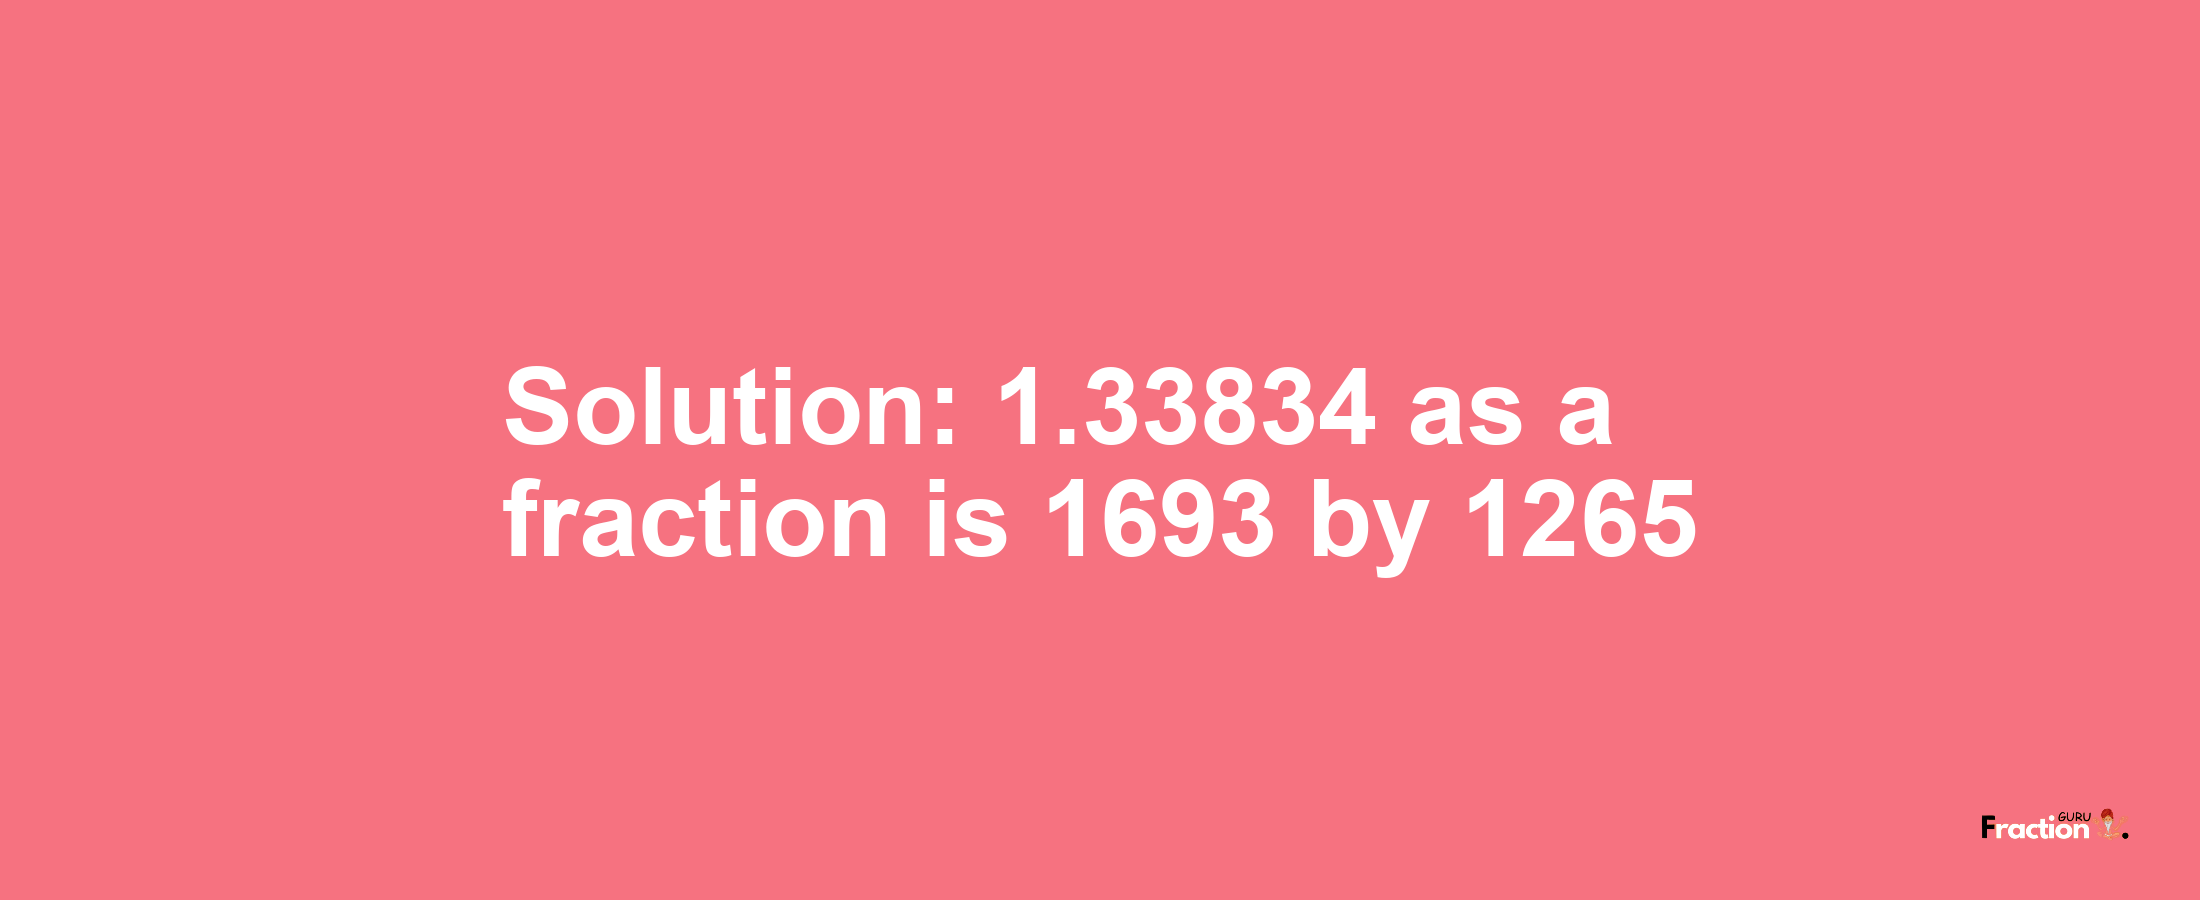 Solution:1.33834 as a fraction is 1693/1265